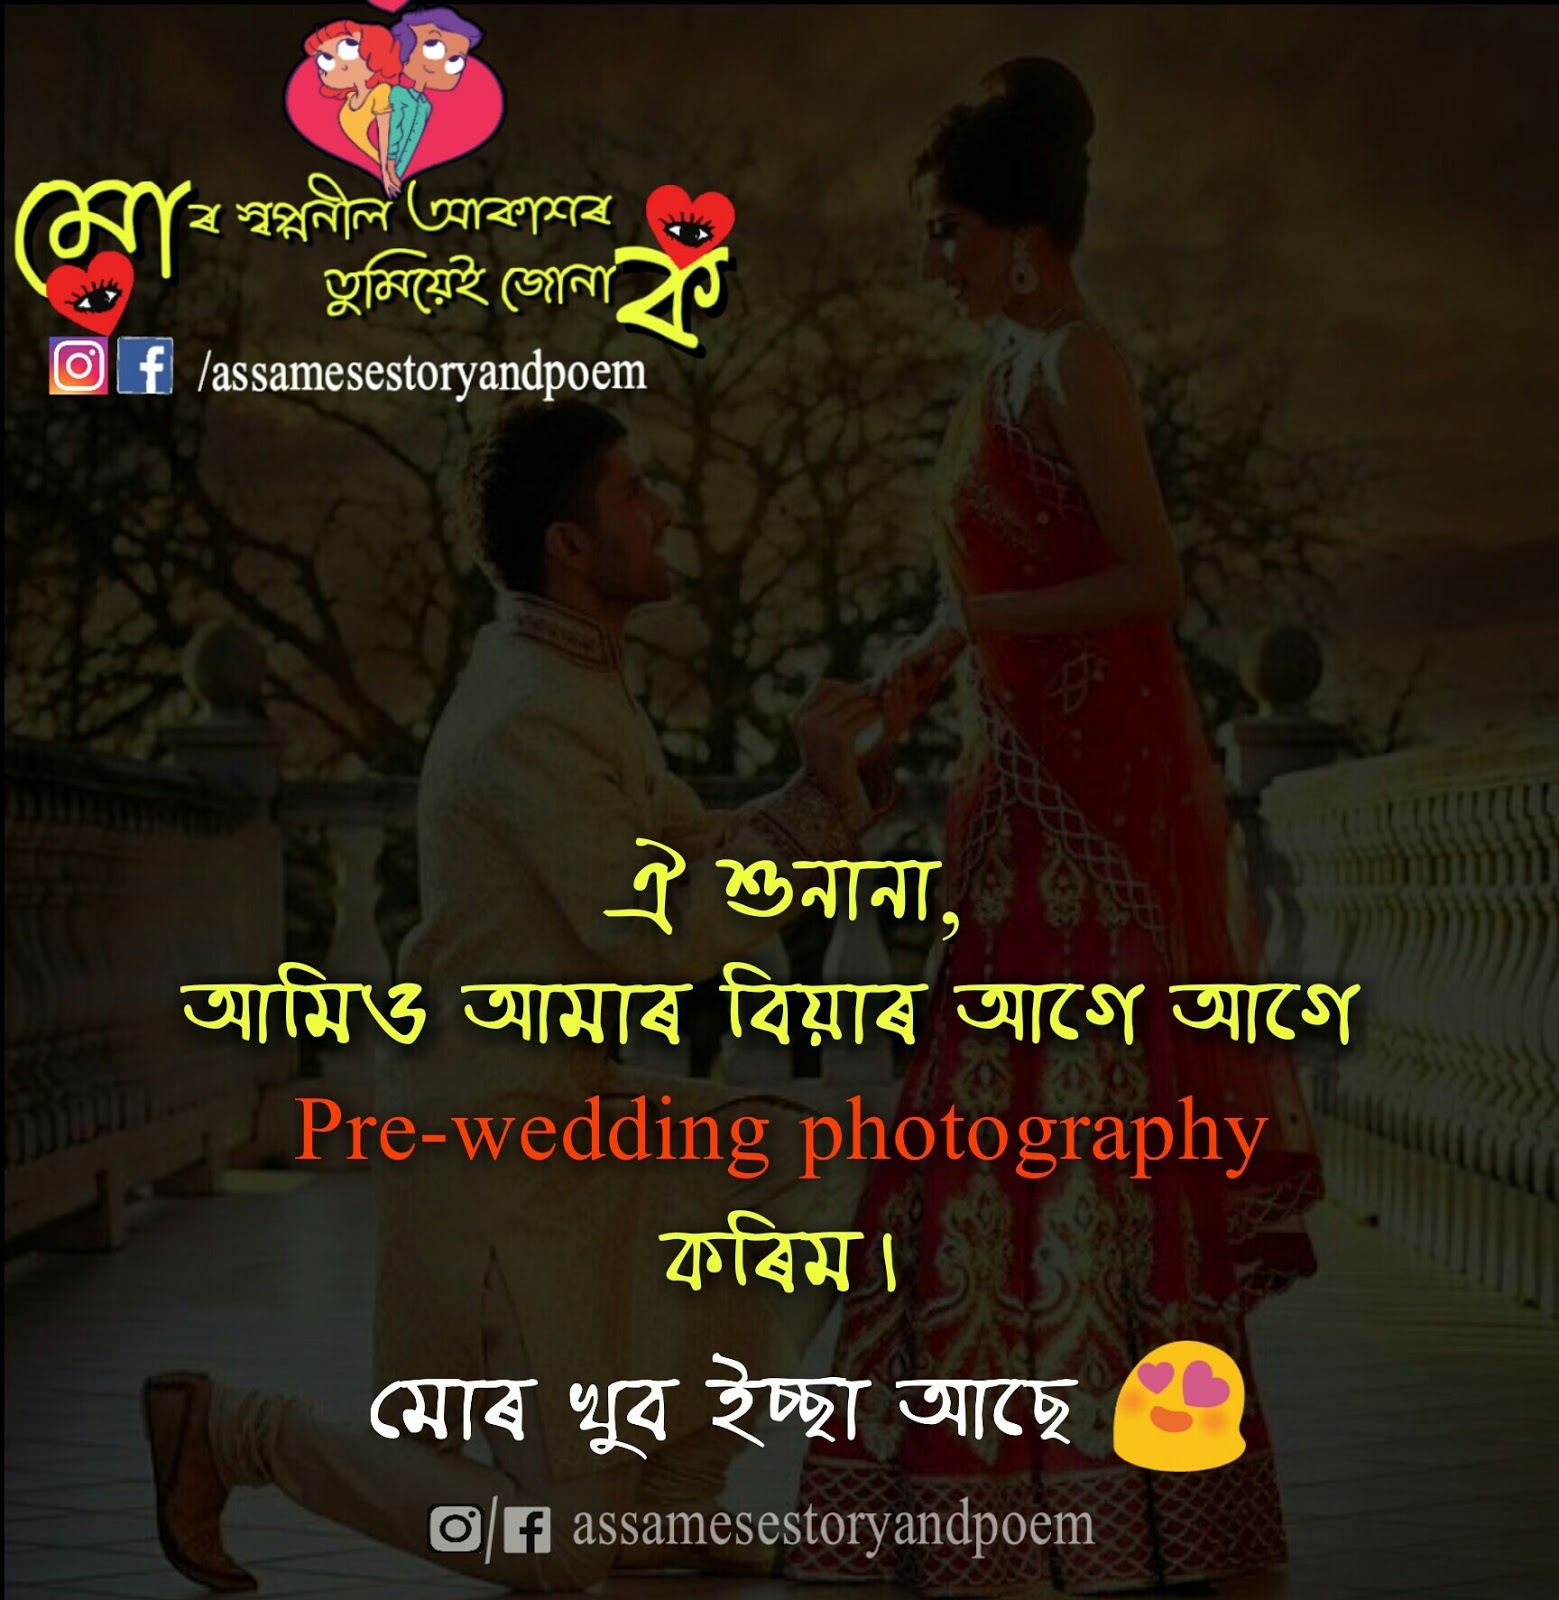 Top Assamese Quotes On Love | Assamese Status , Caption | Assamese Love  Status - JonakAxom- Assamese Quotes, Blogging , Business Ideas, Tips And  Tricks